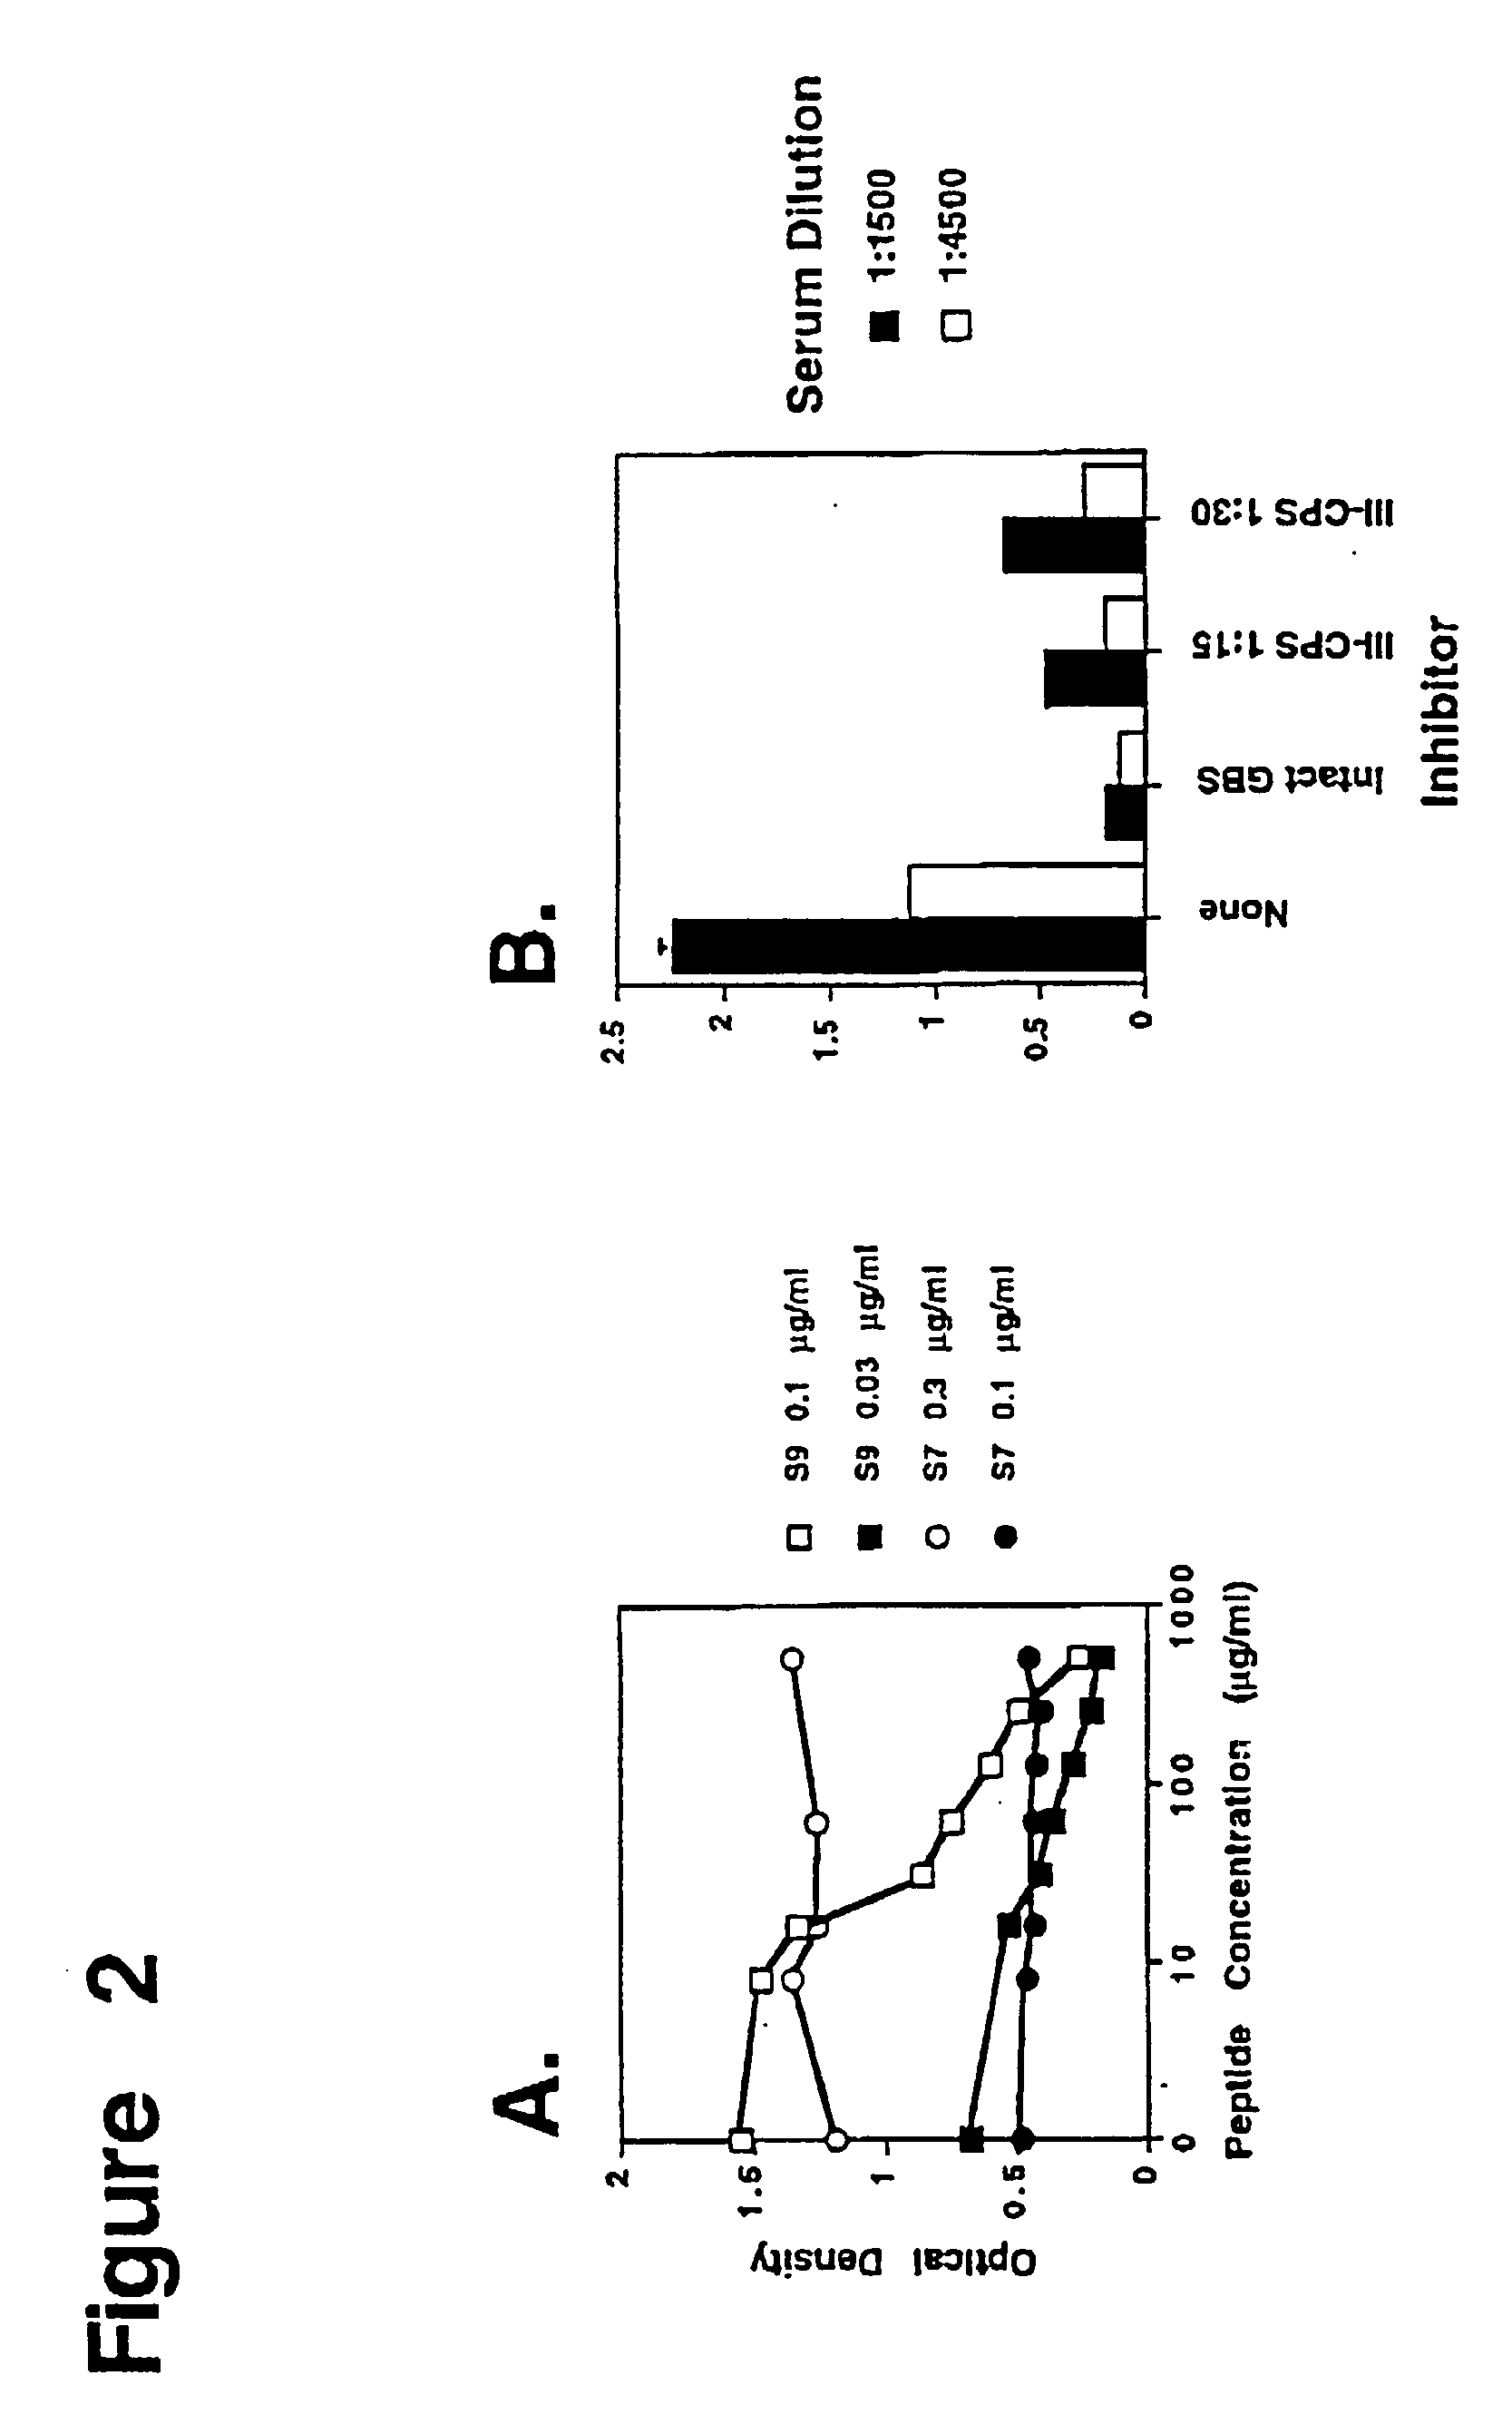 Method of isolating a peptide which immunologically mimics microbial carbohydrates including group B streptococcal carbohydrates and the use thereof in a vaccine